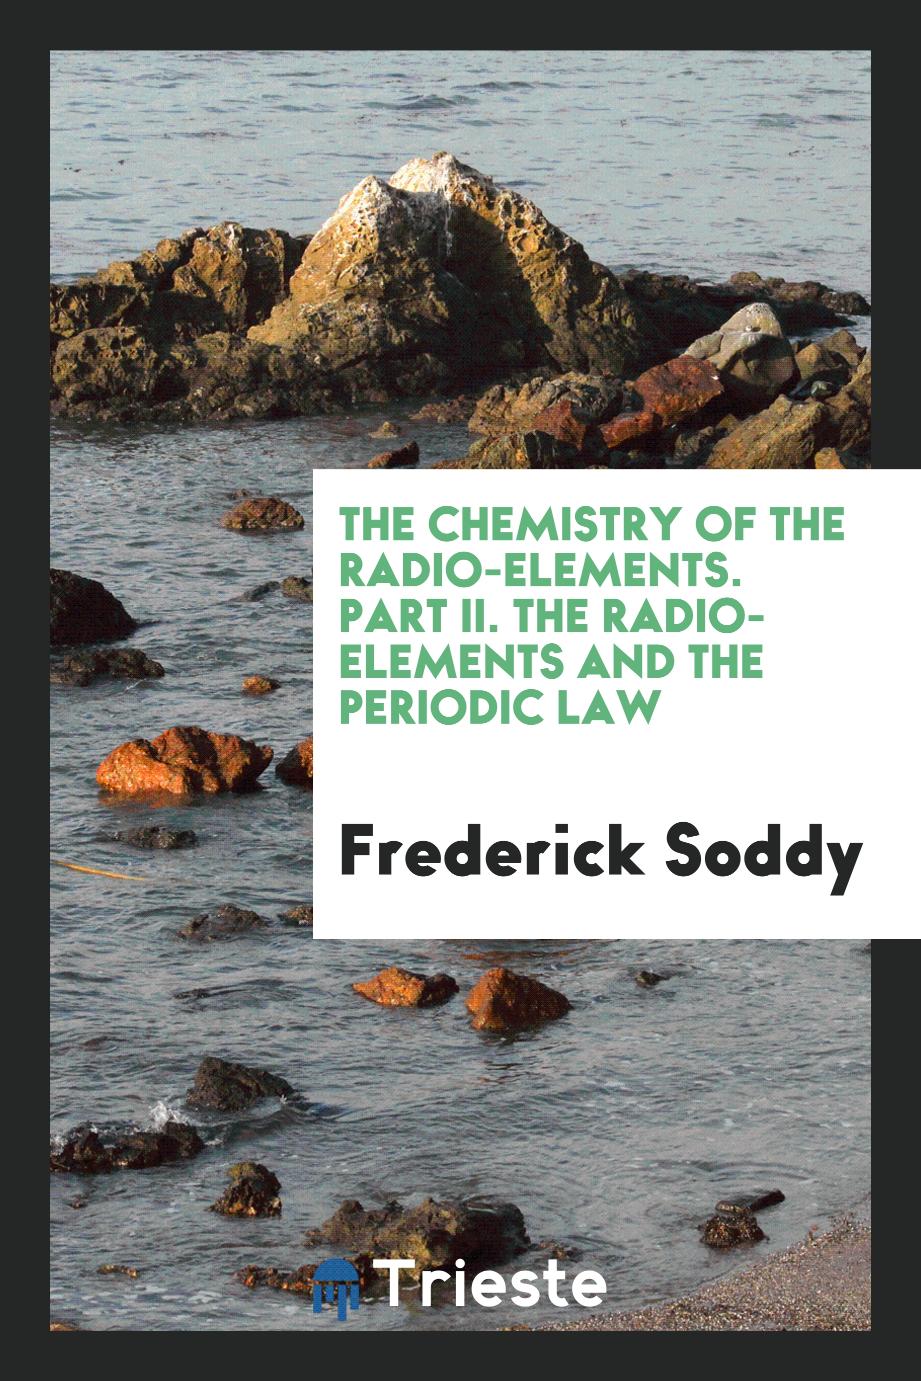 Frederick Soddy - The Chemistry of the Radio-elements. Part II. The radio-elements and the periodic law